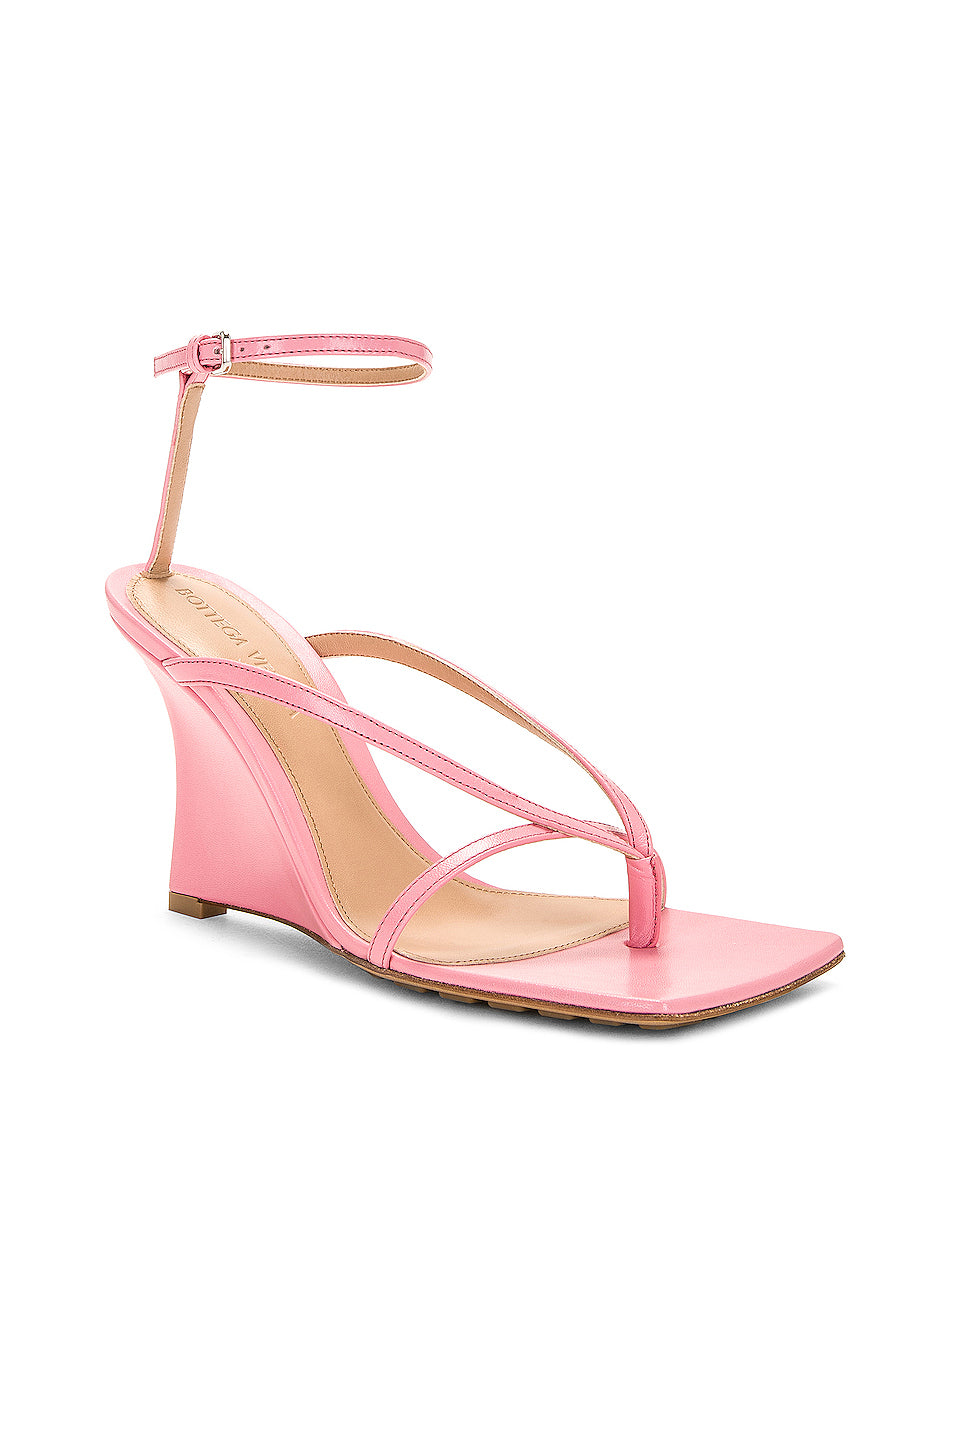 Stretch Ankle Strap Wedge Sandal